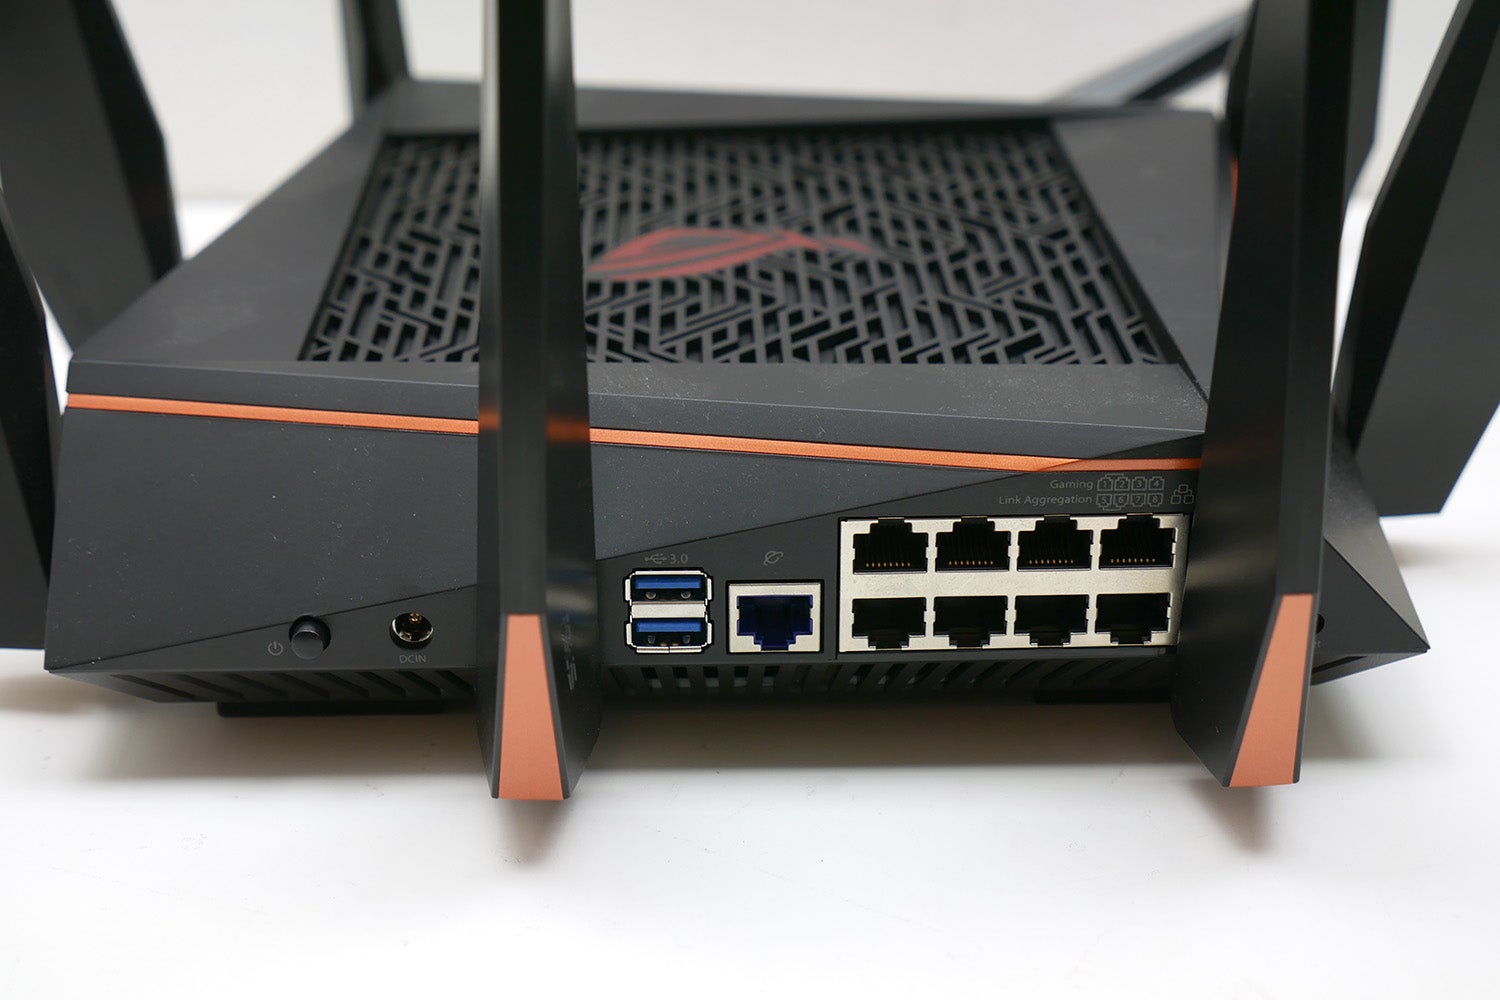 Asus ROG Rapture GT-AC5300 router with visible ports.